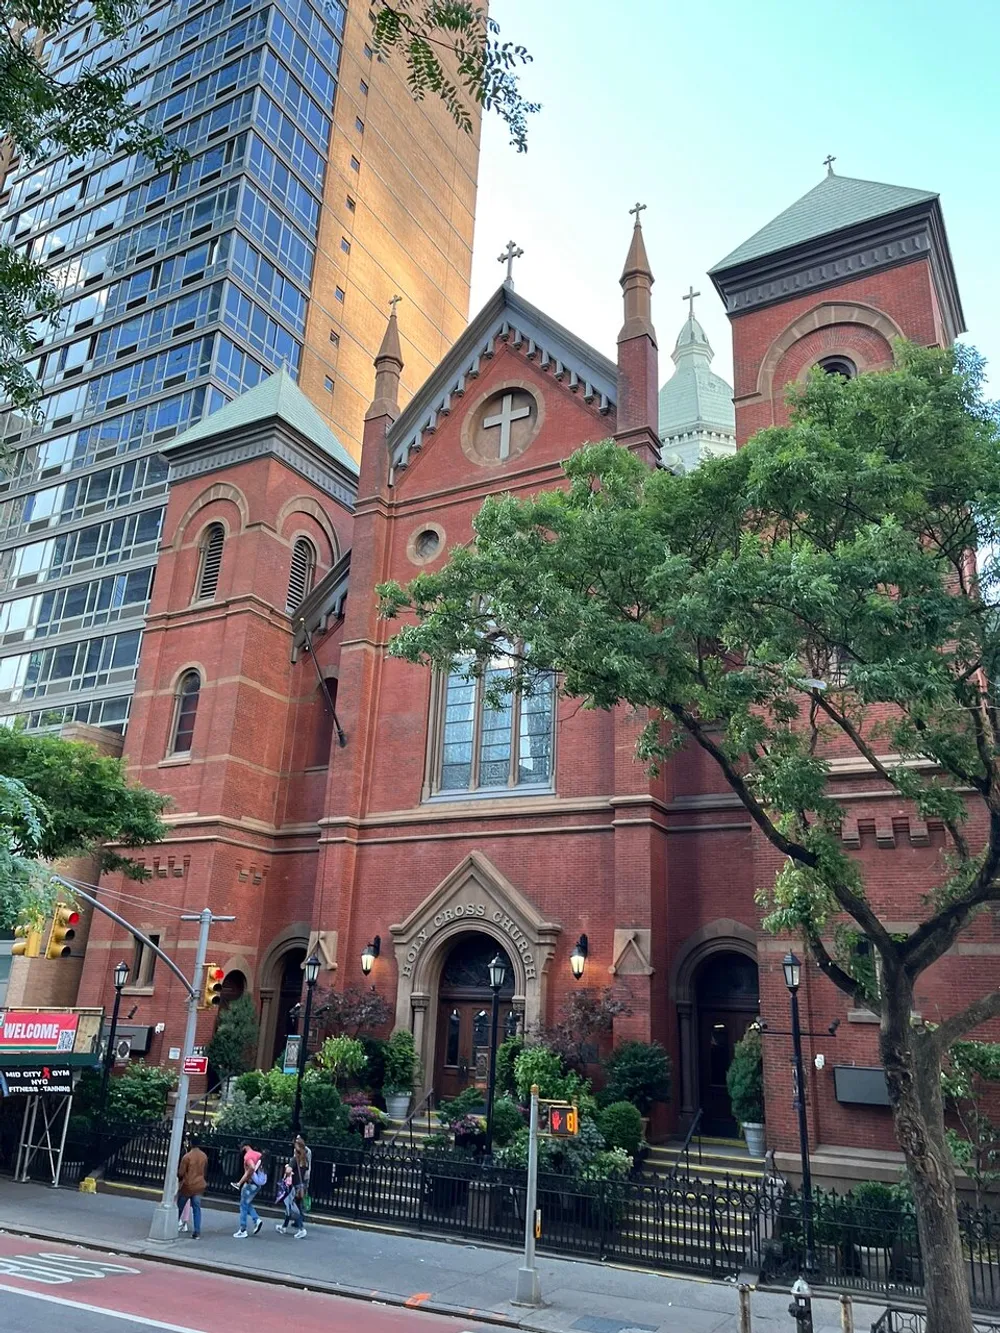 A traditional red brick church with Gothic architectural features nestles among modern buildings and lush green trees under a clear sky